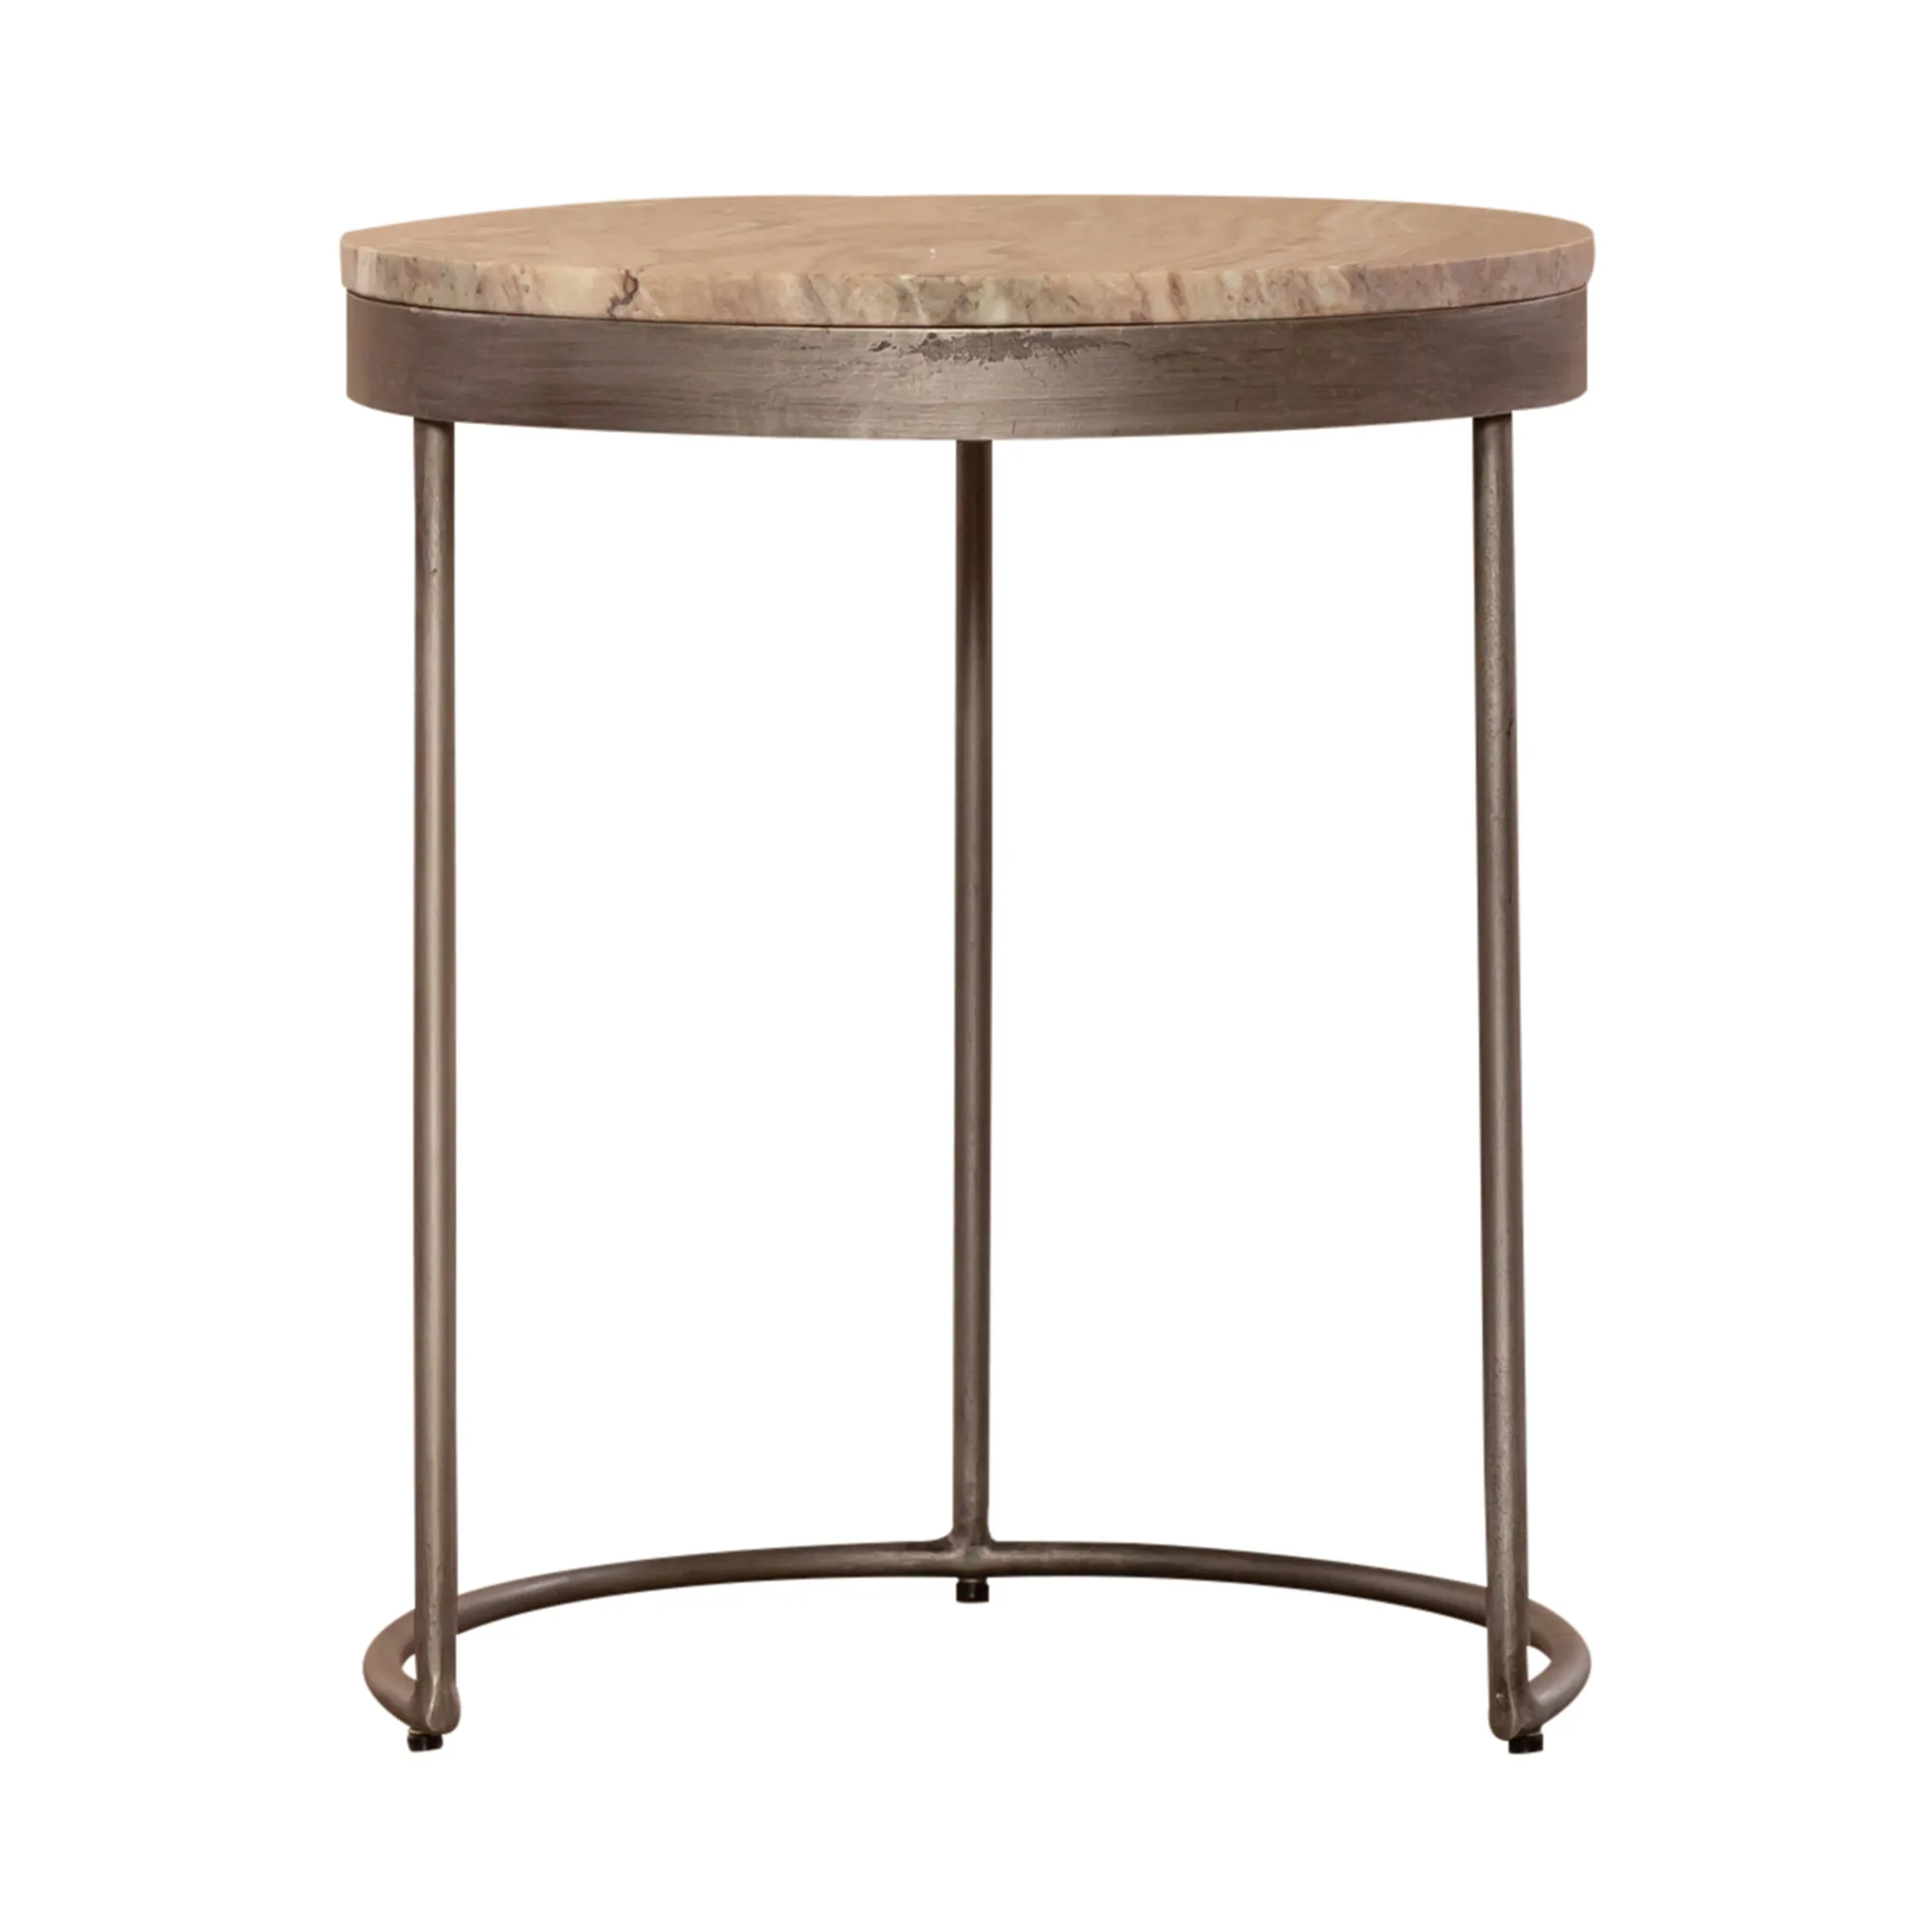 NESTING TABLES